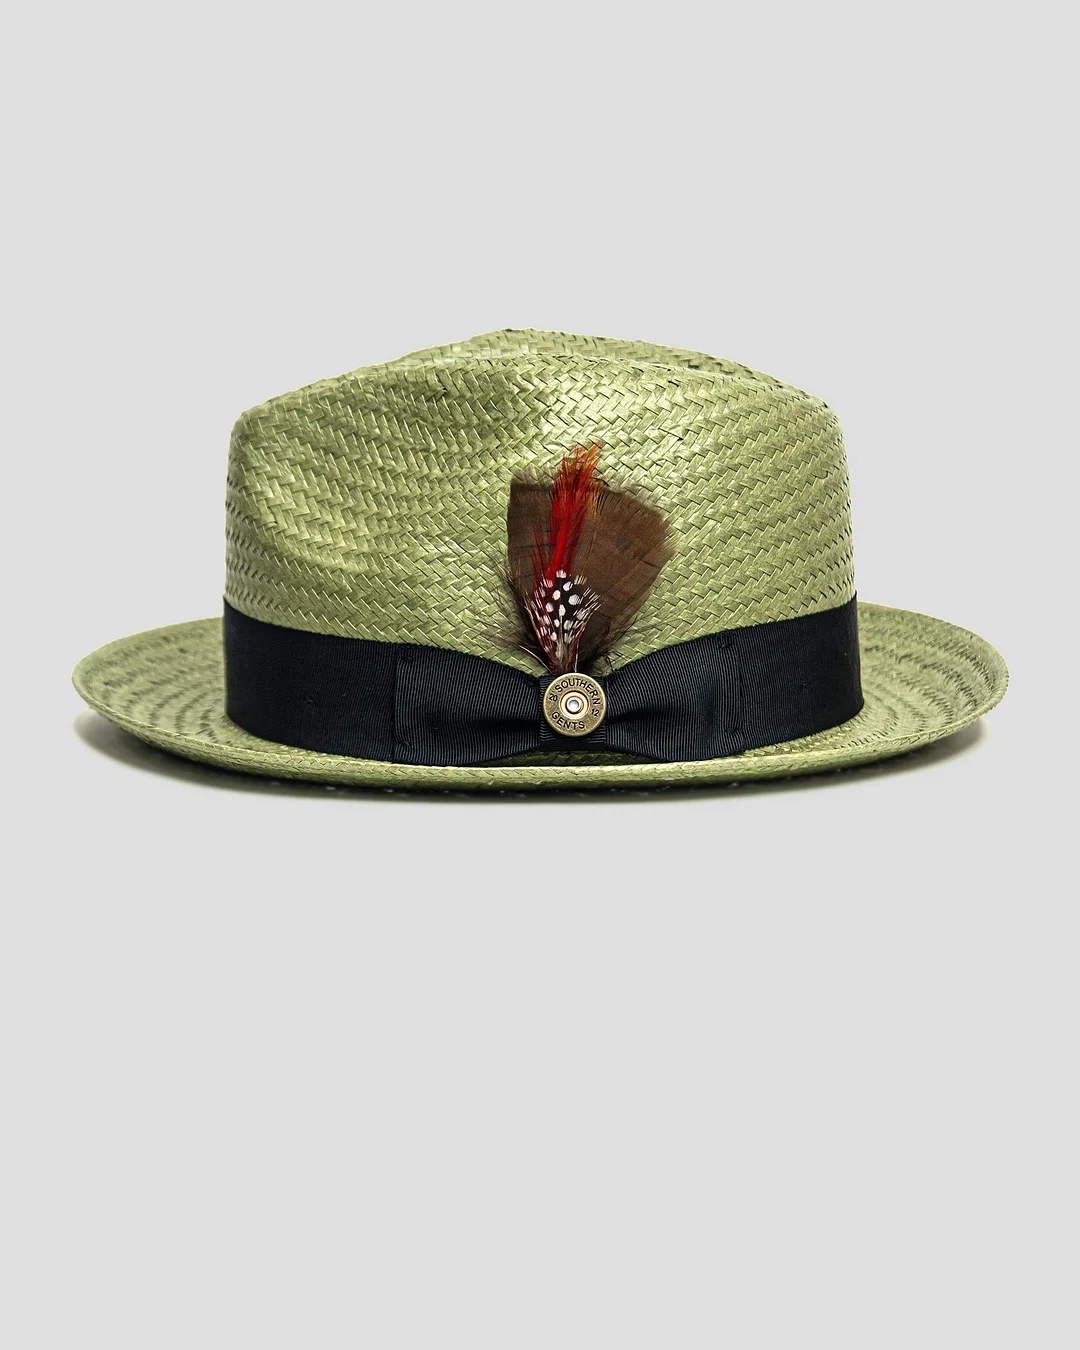 Miller Ranch Straw Trilby Fedora - Avocado[Fast shipping and box packing]